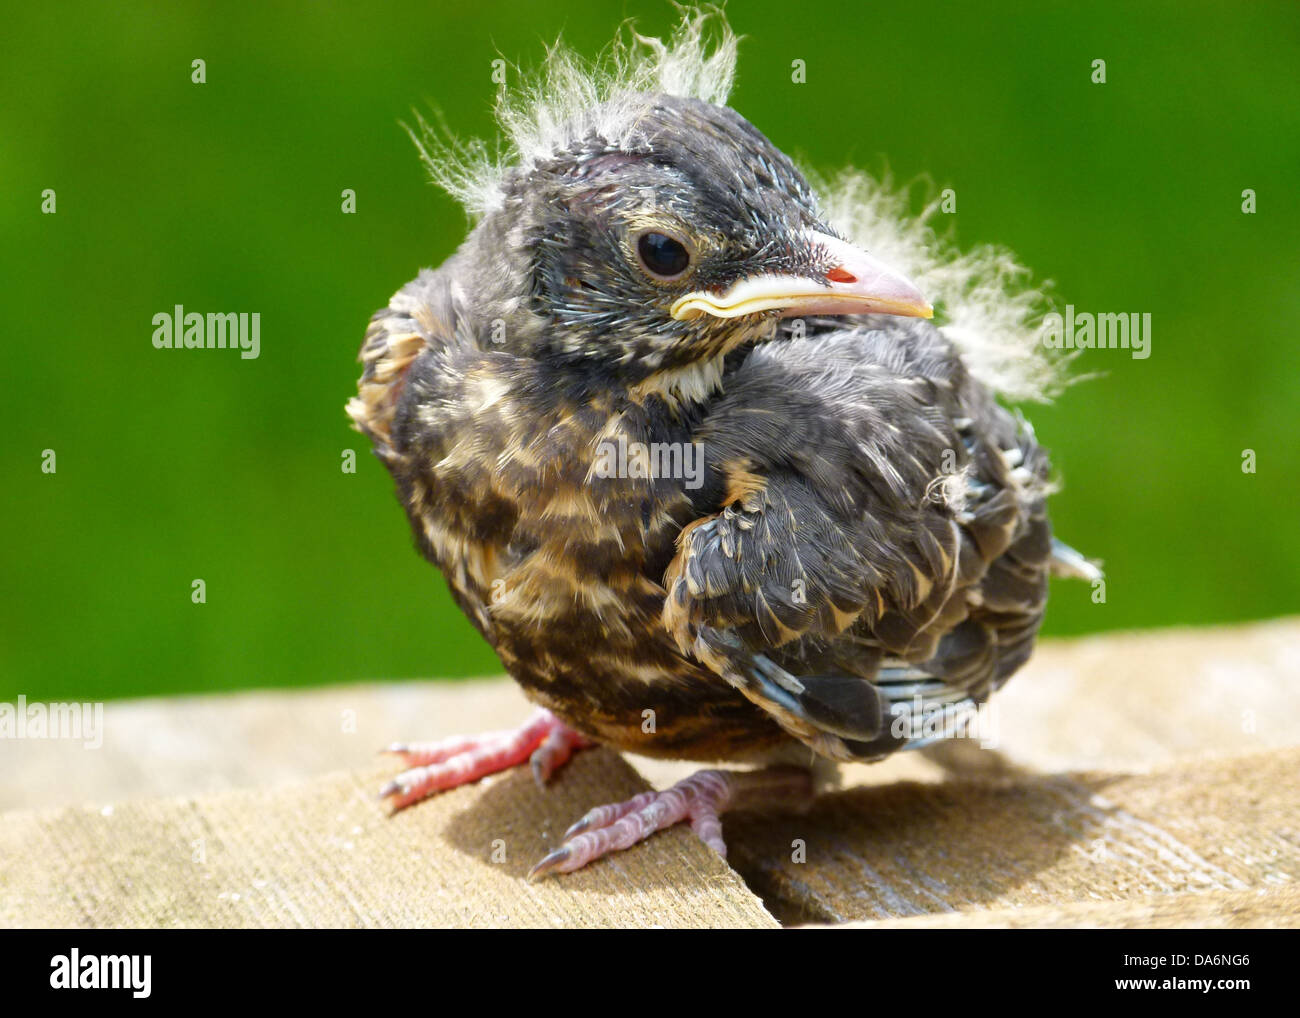 red robin chick young bird feathered nature Stock Photo